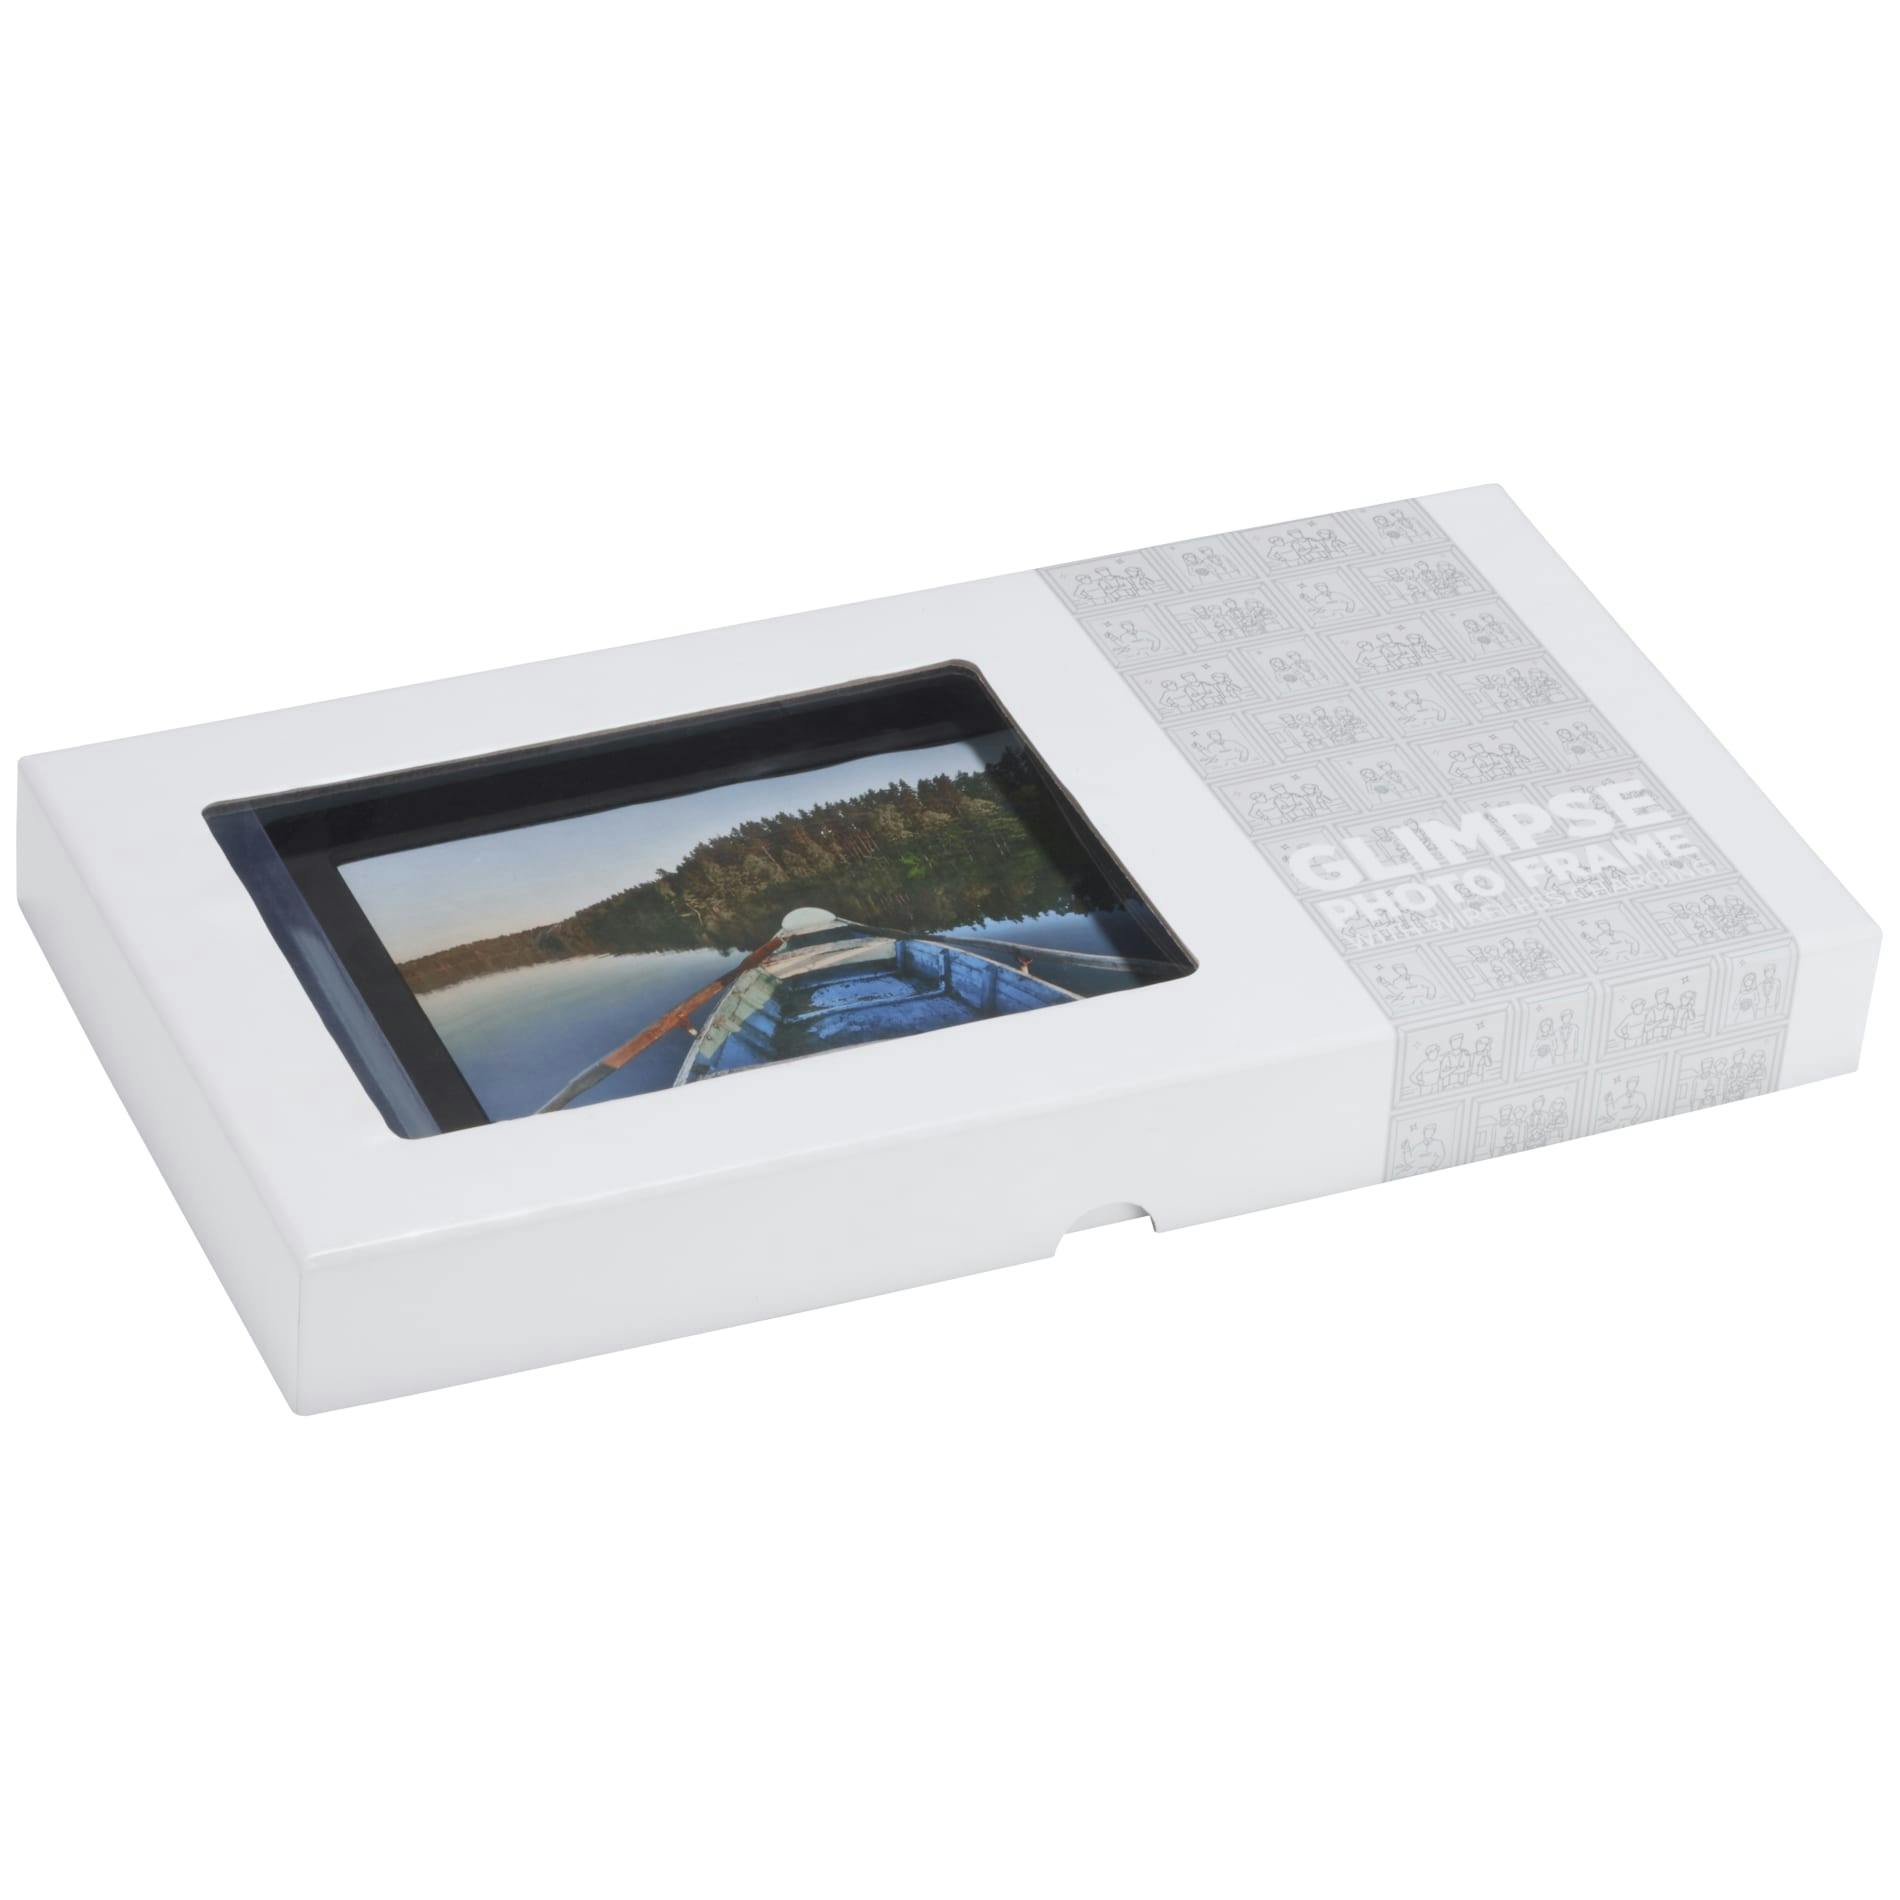 Glimpse Photo Frame with Wireless Charging Pad - additional Image 7